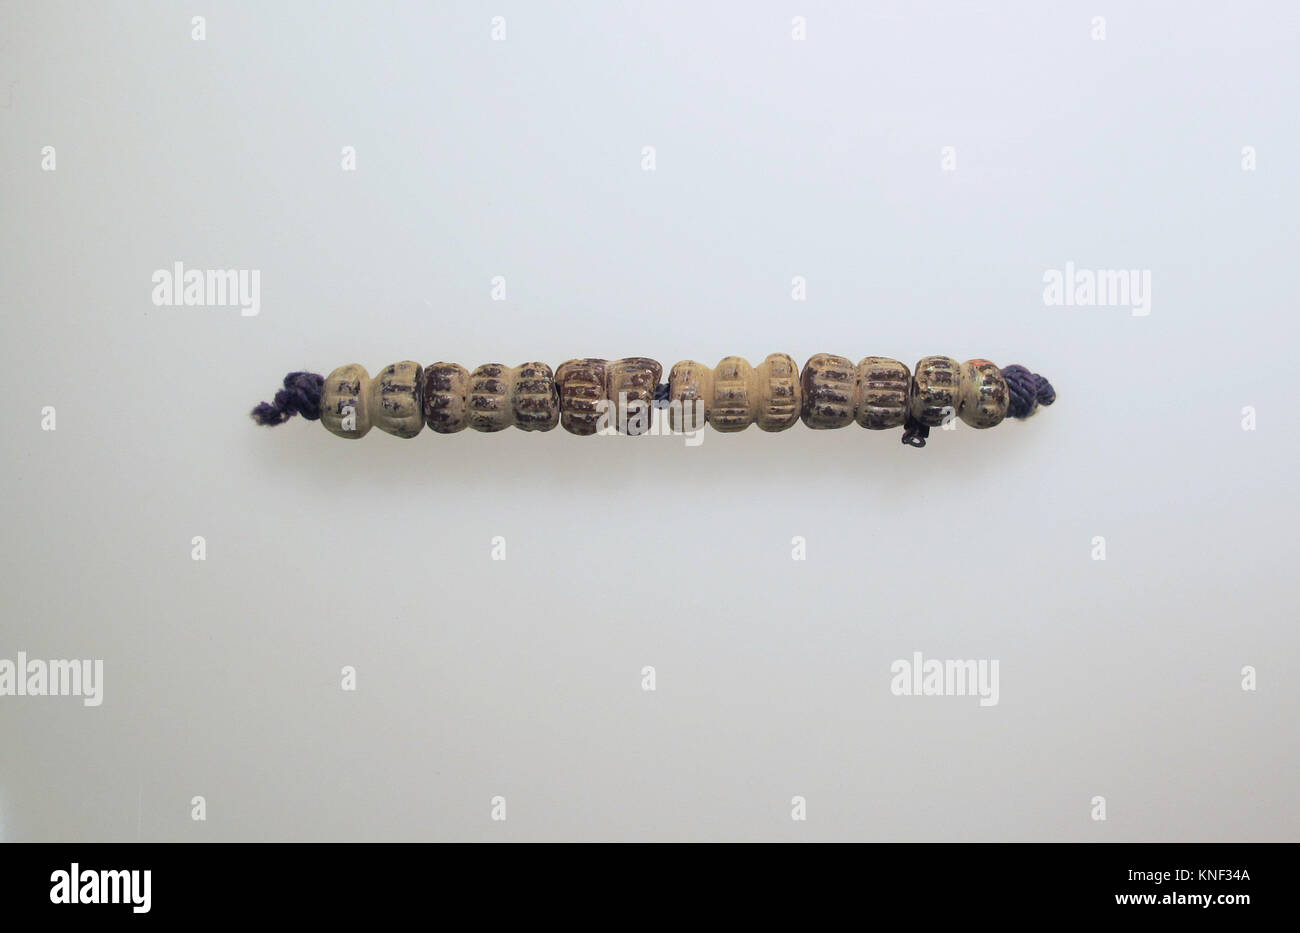 Beads, 6. Culture: Roman; Medium: Glass; Dimensions: Other: 4 7/16 x 1/2 in. (11.2 x 1.3 cm); Classification: Glass Stock Photo